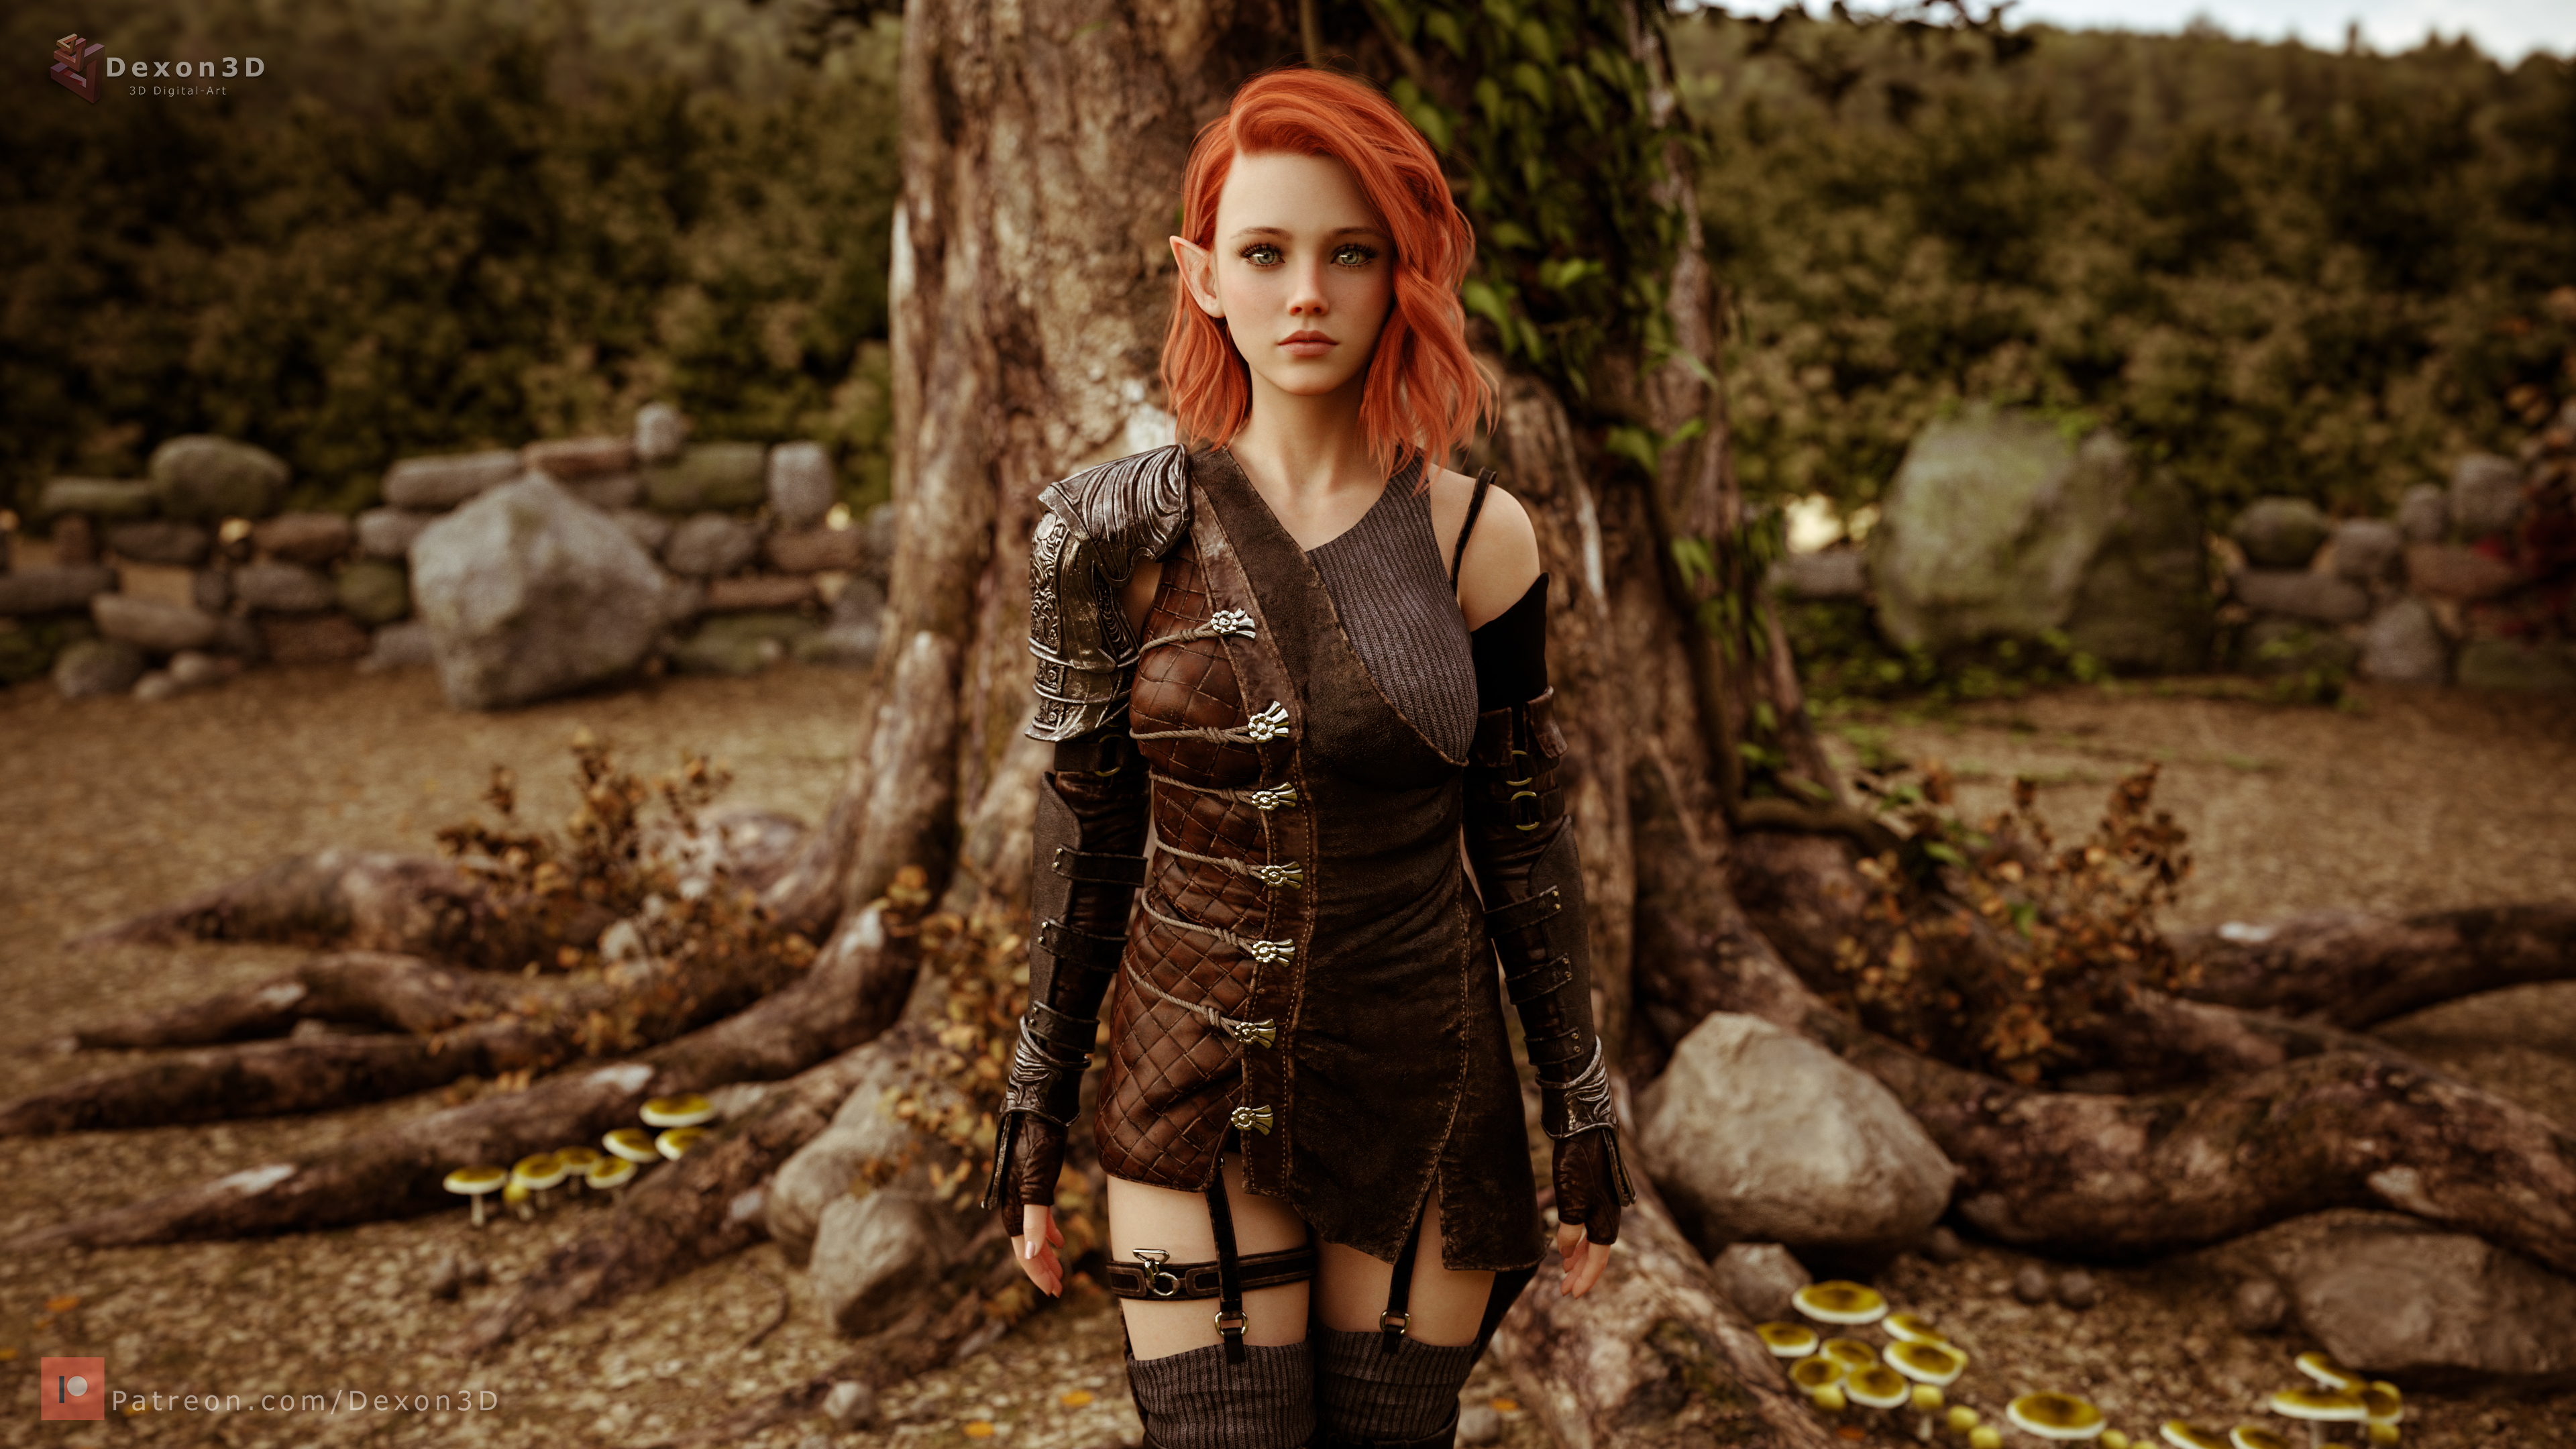 General 3840x2160 Dexon3D CGI women pointy ears redhead fantasy girl leather nature elves trees Root ground looking at viewer standing digital art watermarked outdoors women outdoors rocks depth of field